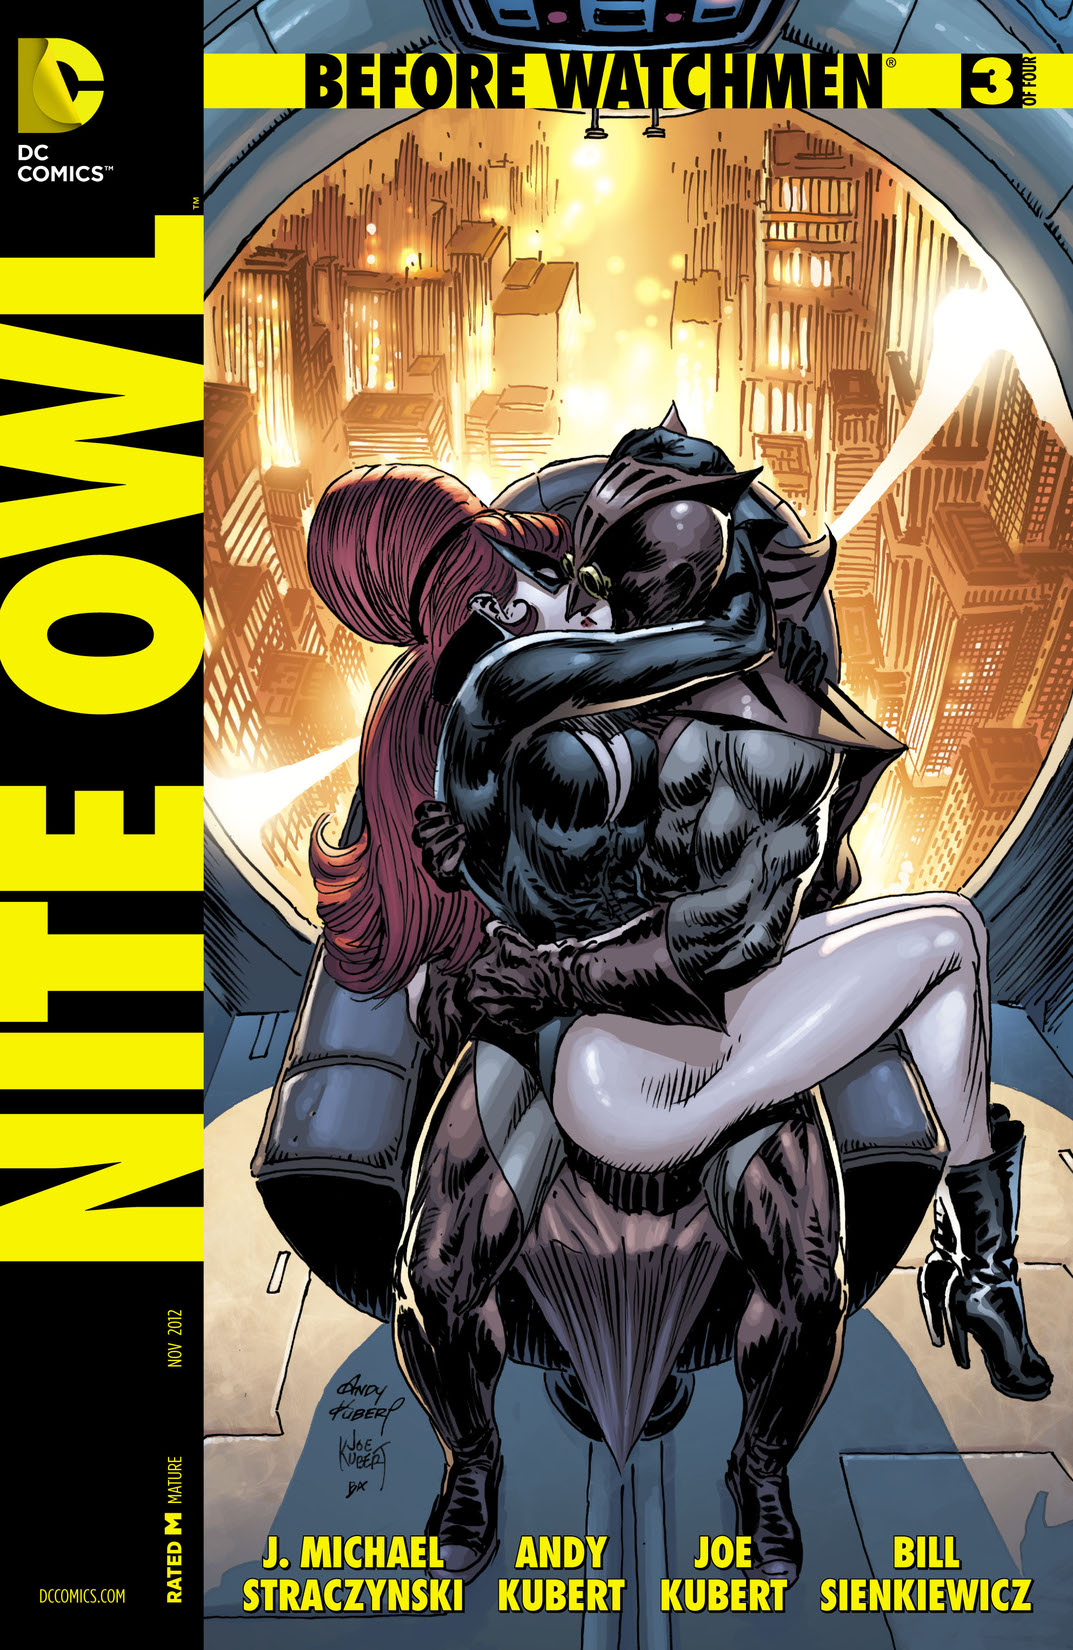 Before Watchmen: Nite Owl #3 preview images